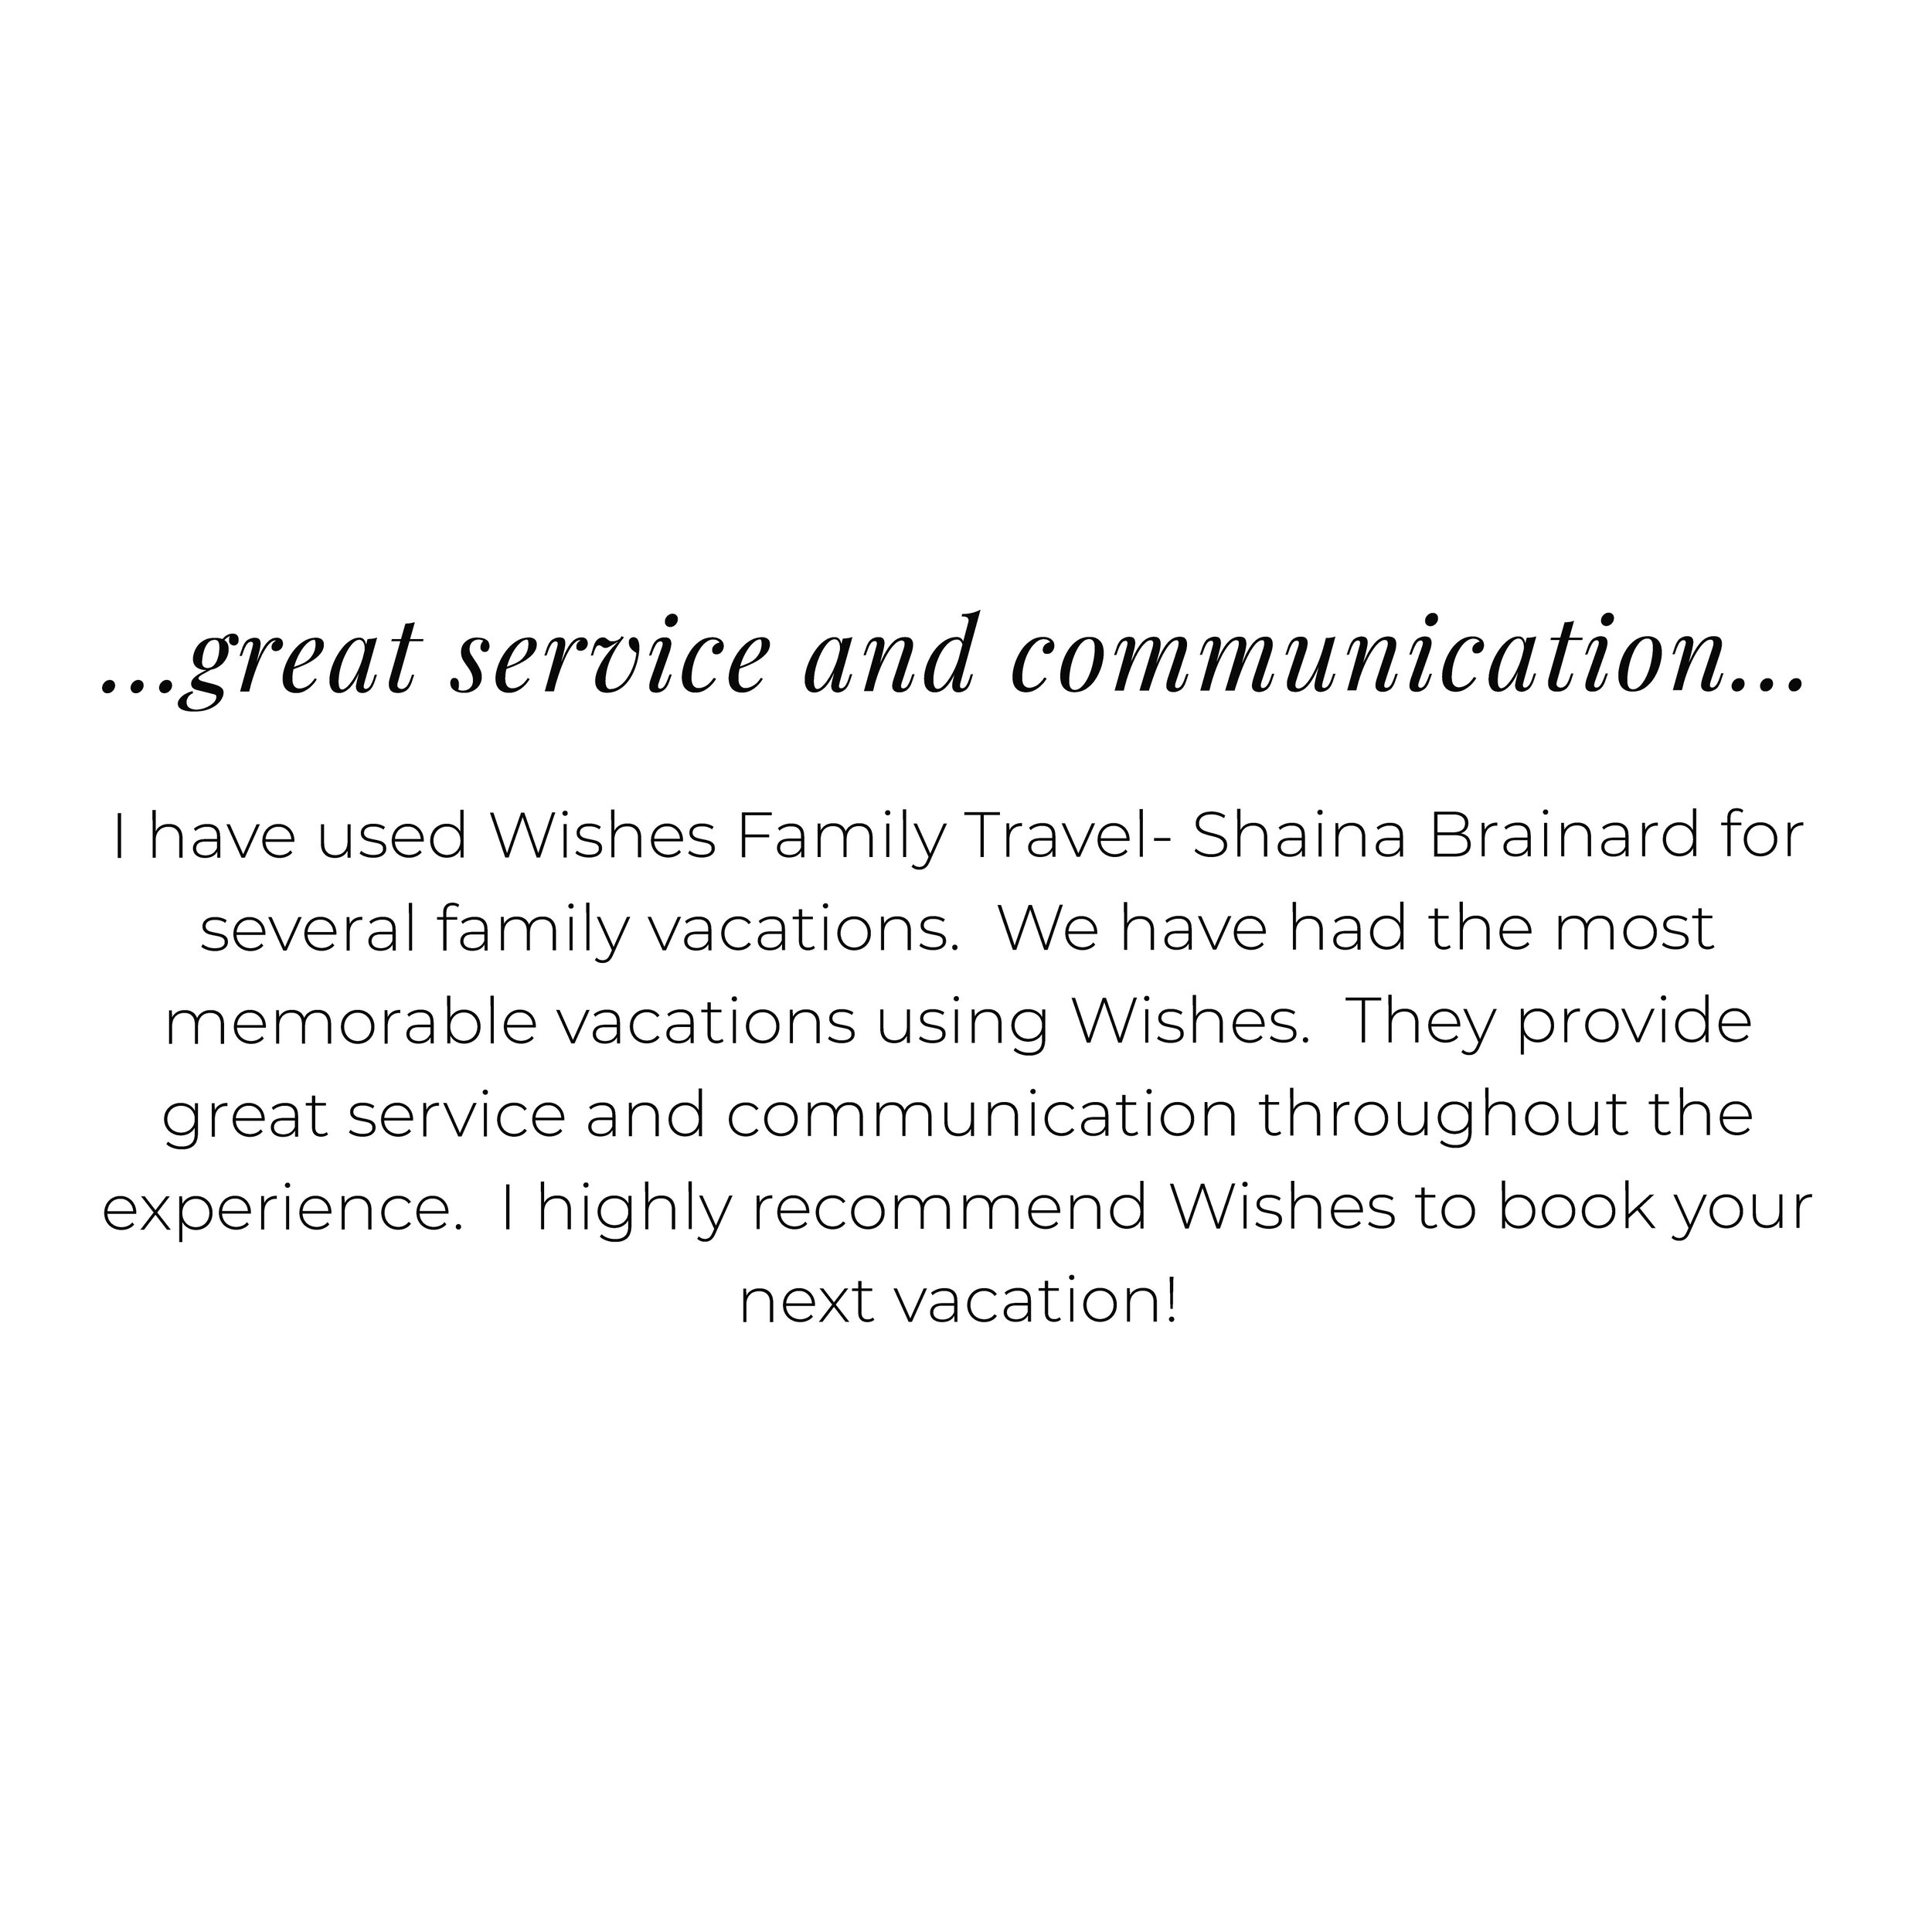 Wishes_Testimonials_mobile_0002s_0000_…great service and communication… I have used Wishes Family Tra.jpg